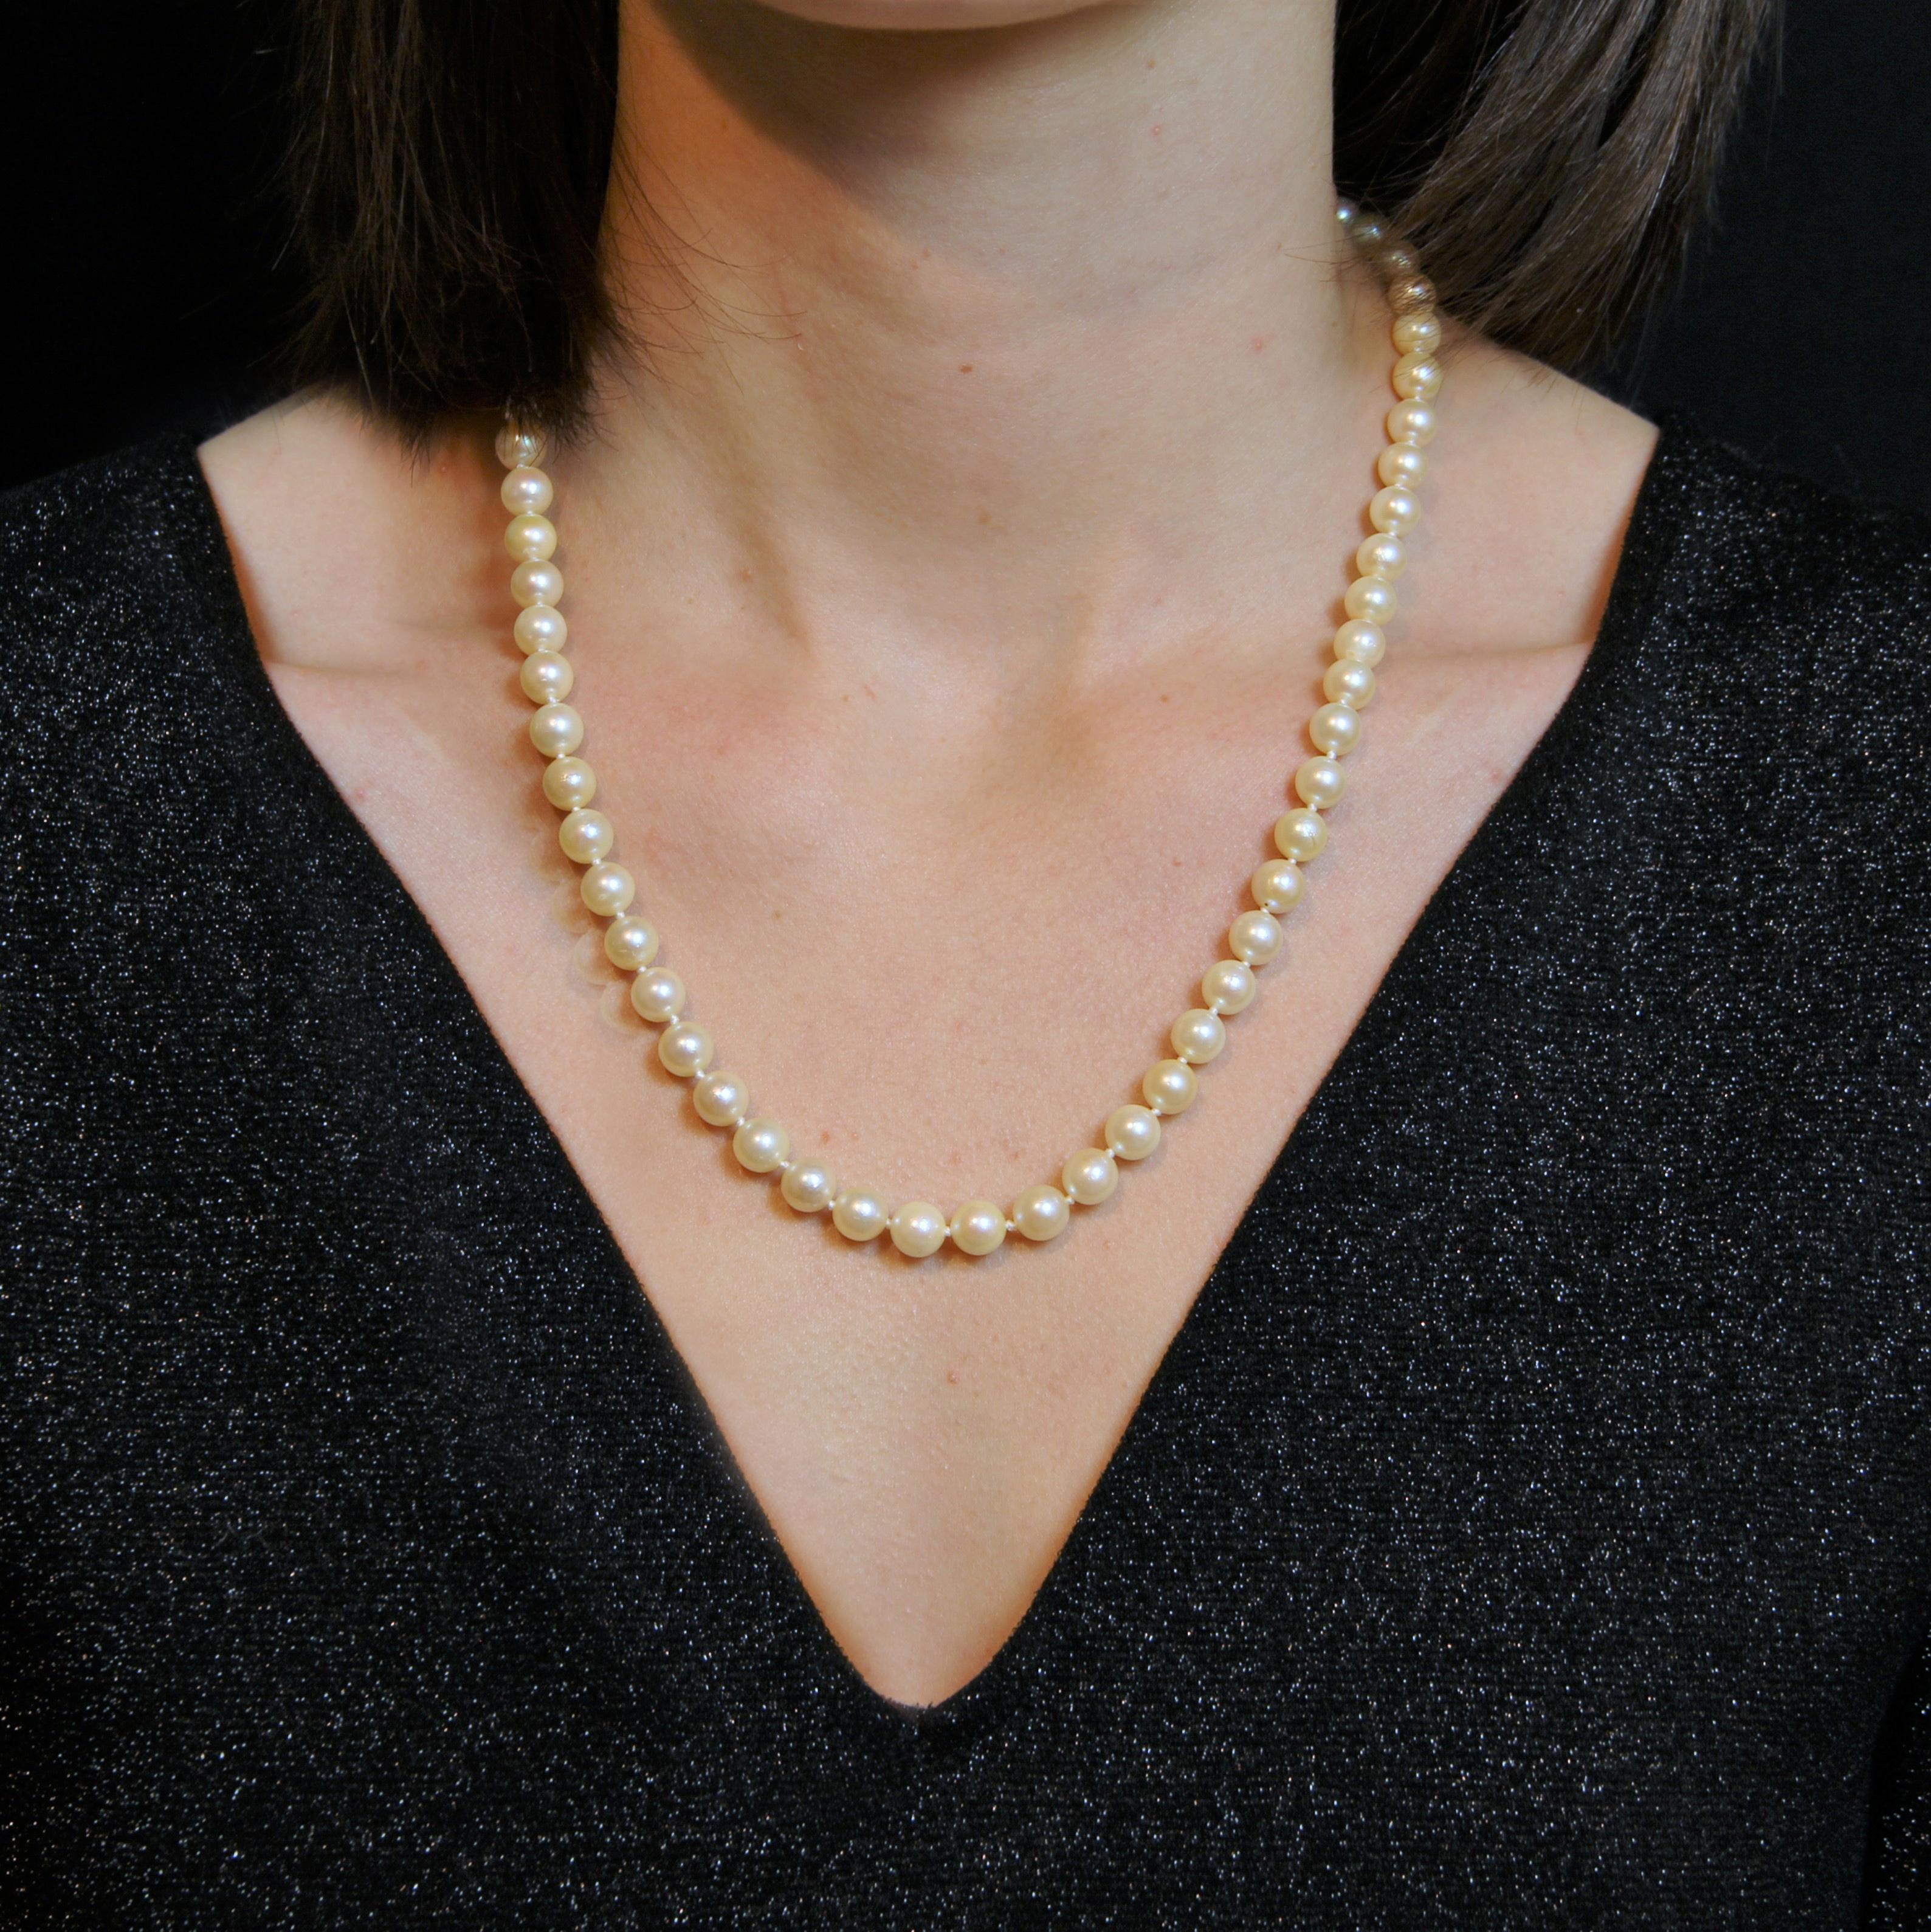 Necklace made of a row of cultured pearls of almost identical size. The clasp is hidden in the pearl at the end. The safety chain with spring ring secures the clasp.
Diameter of pearls : 6.5/7 to 7.5/8 mm.
Length : 53,5 cm approximately.
Total